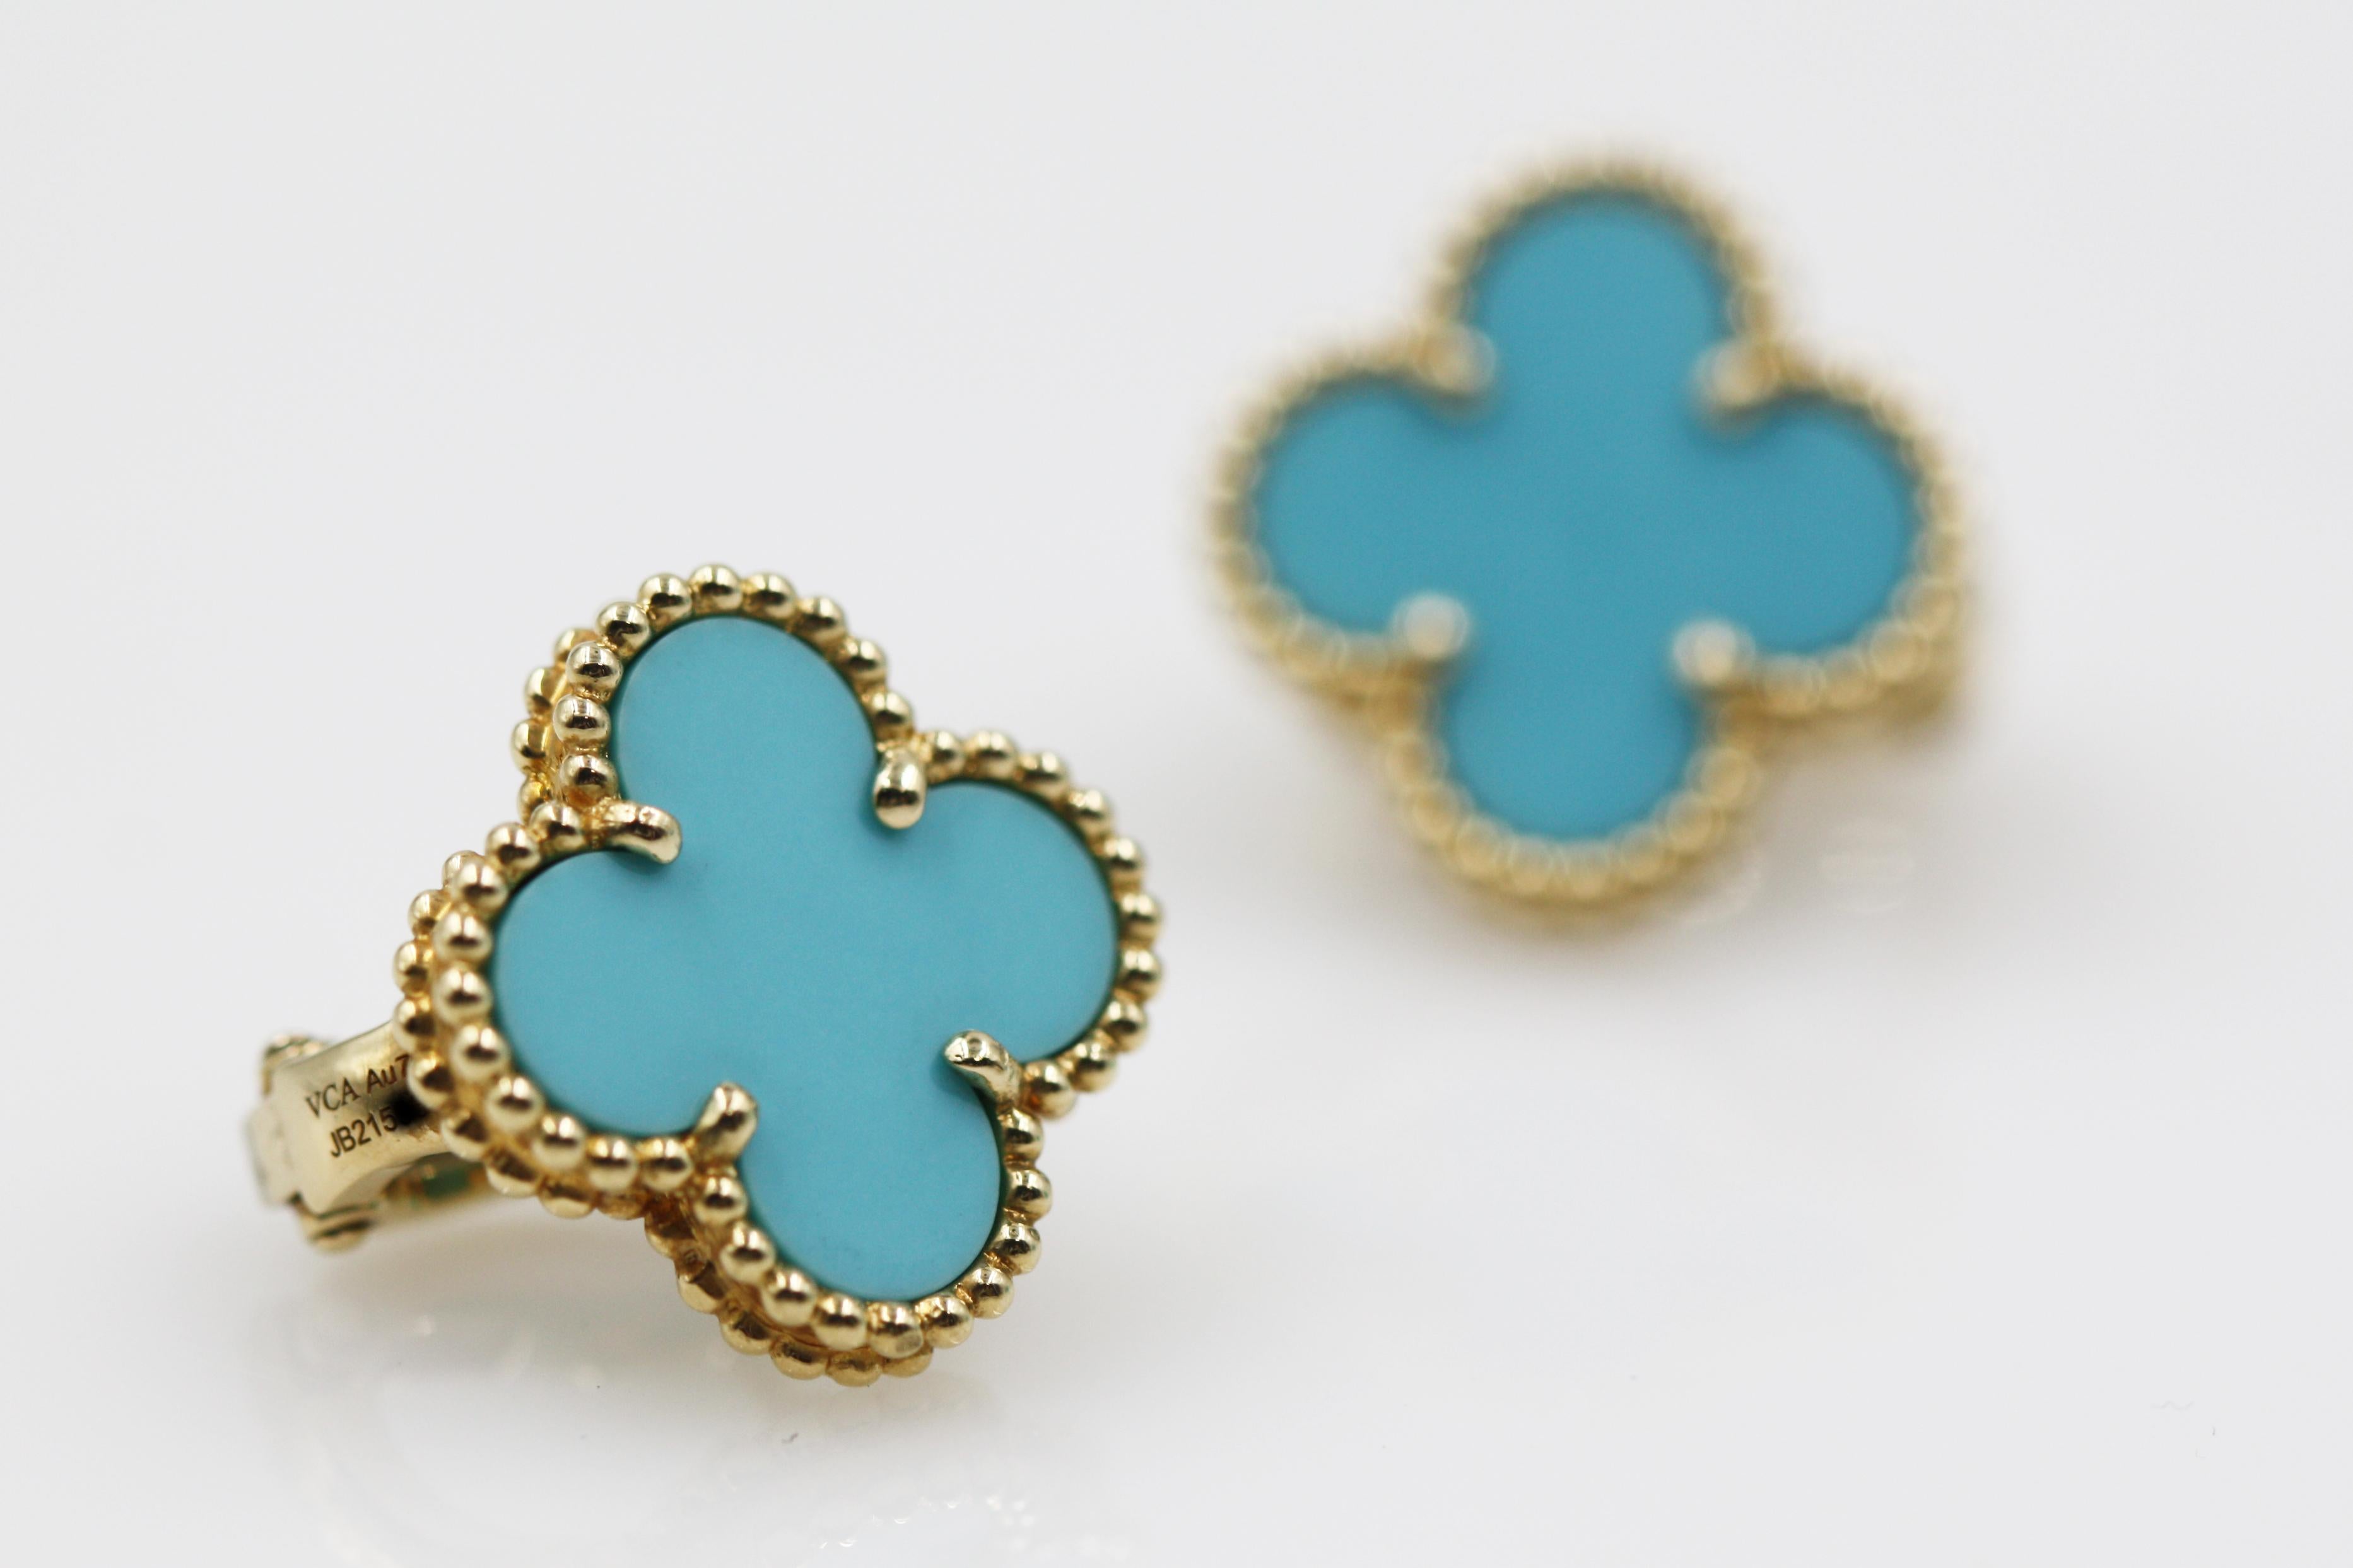 Van Cleef & Arpels 18K Yellow Gold Turquoise Earring

Stones
Turquoise : 2 stones
Size: 1.5 x 1.5 cm

Item will come with a box and paper
Stock#: VCA211